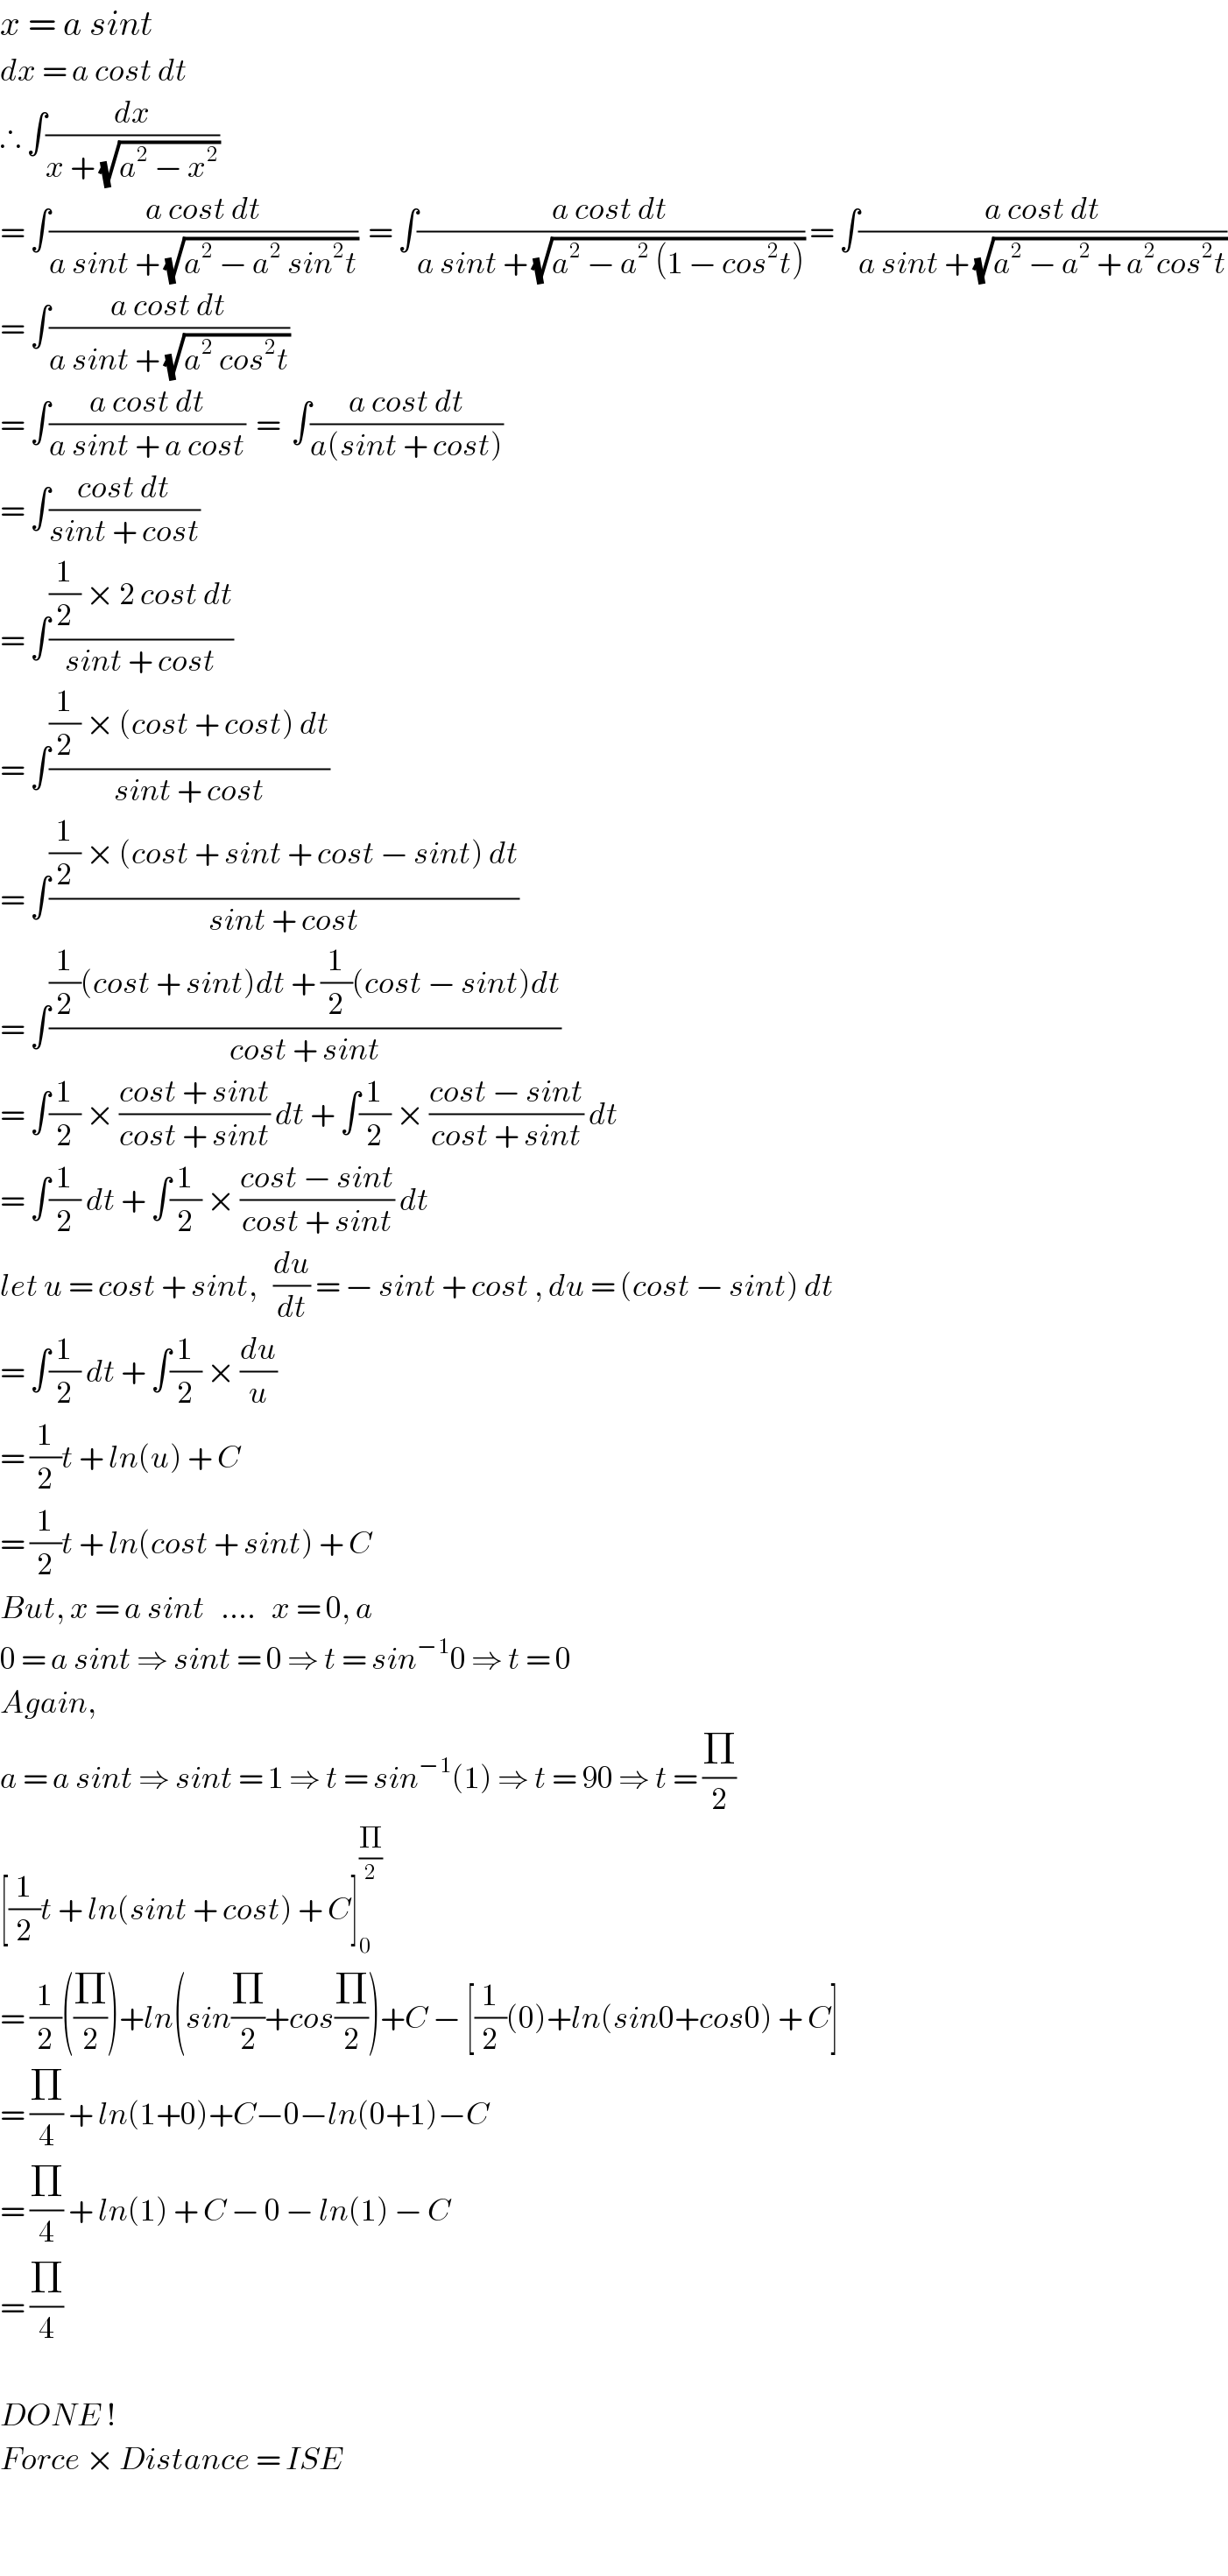 x = a sint   dx = a cost dt   ∴ ∫(dx/(x + (√(a^2  − x^2 ))))   = ∫((a cost dt)/(a sint + (√(a^2  − a^2  sin^2 t))))  = ∫((a cost dt)/(a sint + (√(a^2  − a^2  (1 − cos^2 t))))) = ∫((a cost dt)/(a sint + (√(a^2  − a^2  + a^2 cos^2 t))))  = ∫((a cost dt)/(a sint + (√(a^2  cos^2 t))))  = ∫((a cost dt)/(a sint + a cost))  =  ∫((a cost dt)/(a(sint + cost)))  = ∫((cost dt)/(sint + cost))  = ∫(((1/2) × 2 cost dt)/(sint + cost))  = ∫(((1/2) × (cost + cost) dt)/(sint + cost))  = ∫(((1/2) × (cost + sint + cost − sint) dt)/(sint + cost))   = ∫(((1/2)(cost + sint)dt + (1/2)(cost − sint)dt)/(cost + sint))  = ∫(1/2) × ((cost + sint)/(cost + sint)) dt + ∫(1/2) × ((cost − sint)/(cost + sint)) dt  = ∫(1/2) dt + ∫(1/2) × ((cost − sint)/(cost + sint)) dt  let u = cost + sint,   (du/dt) = − sint + cost , du = (cost − sint) dt  = ∫(1/2) dt + ∫(1/2) × (du/u)  = (1/2)t + ln(u) + C  = (1/2)t + ln(cost + sint) + C  But, x = a sint   ....   x = 0, a  0 = a sint ⇒ sint = 0 ⇒ t = sin^(−1) 0 ⇒ t = 0  Again,  a = a sint ⇒ sint = 1 ⇒ t = sin^(−1) (1) ⇒ t = 90 ⇒ t = (Π/2)  [(1/2)t + ln(sint + cost) + C]_0 ^(Π/2)   = (1/2)((Π/2))+ln(sin(Π/2)+cos(Π/2))+C − [(1/2)(0)+ln(sin0+cos0) + C]  = (Π/4) + ln(1+0)+C−0−ln(0+1)−C  = (Π/4) + ln(1) + C − 0 − ln(1) − C  = (Π/4)     DONE !  Force × Distance = ISE    